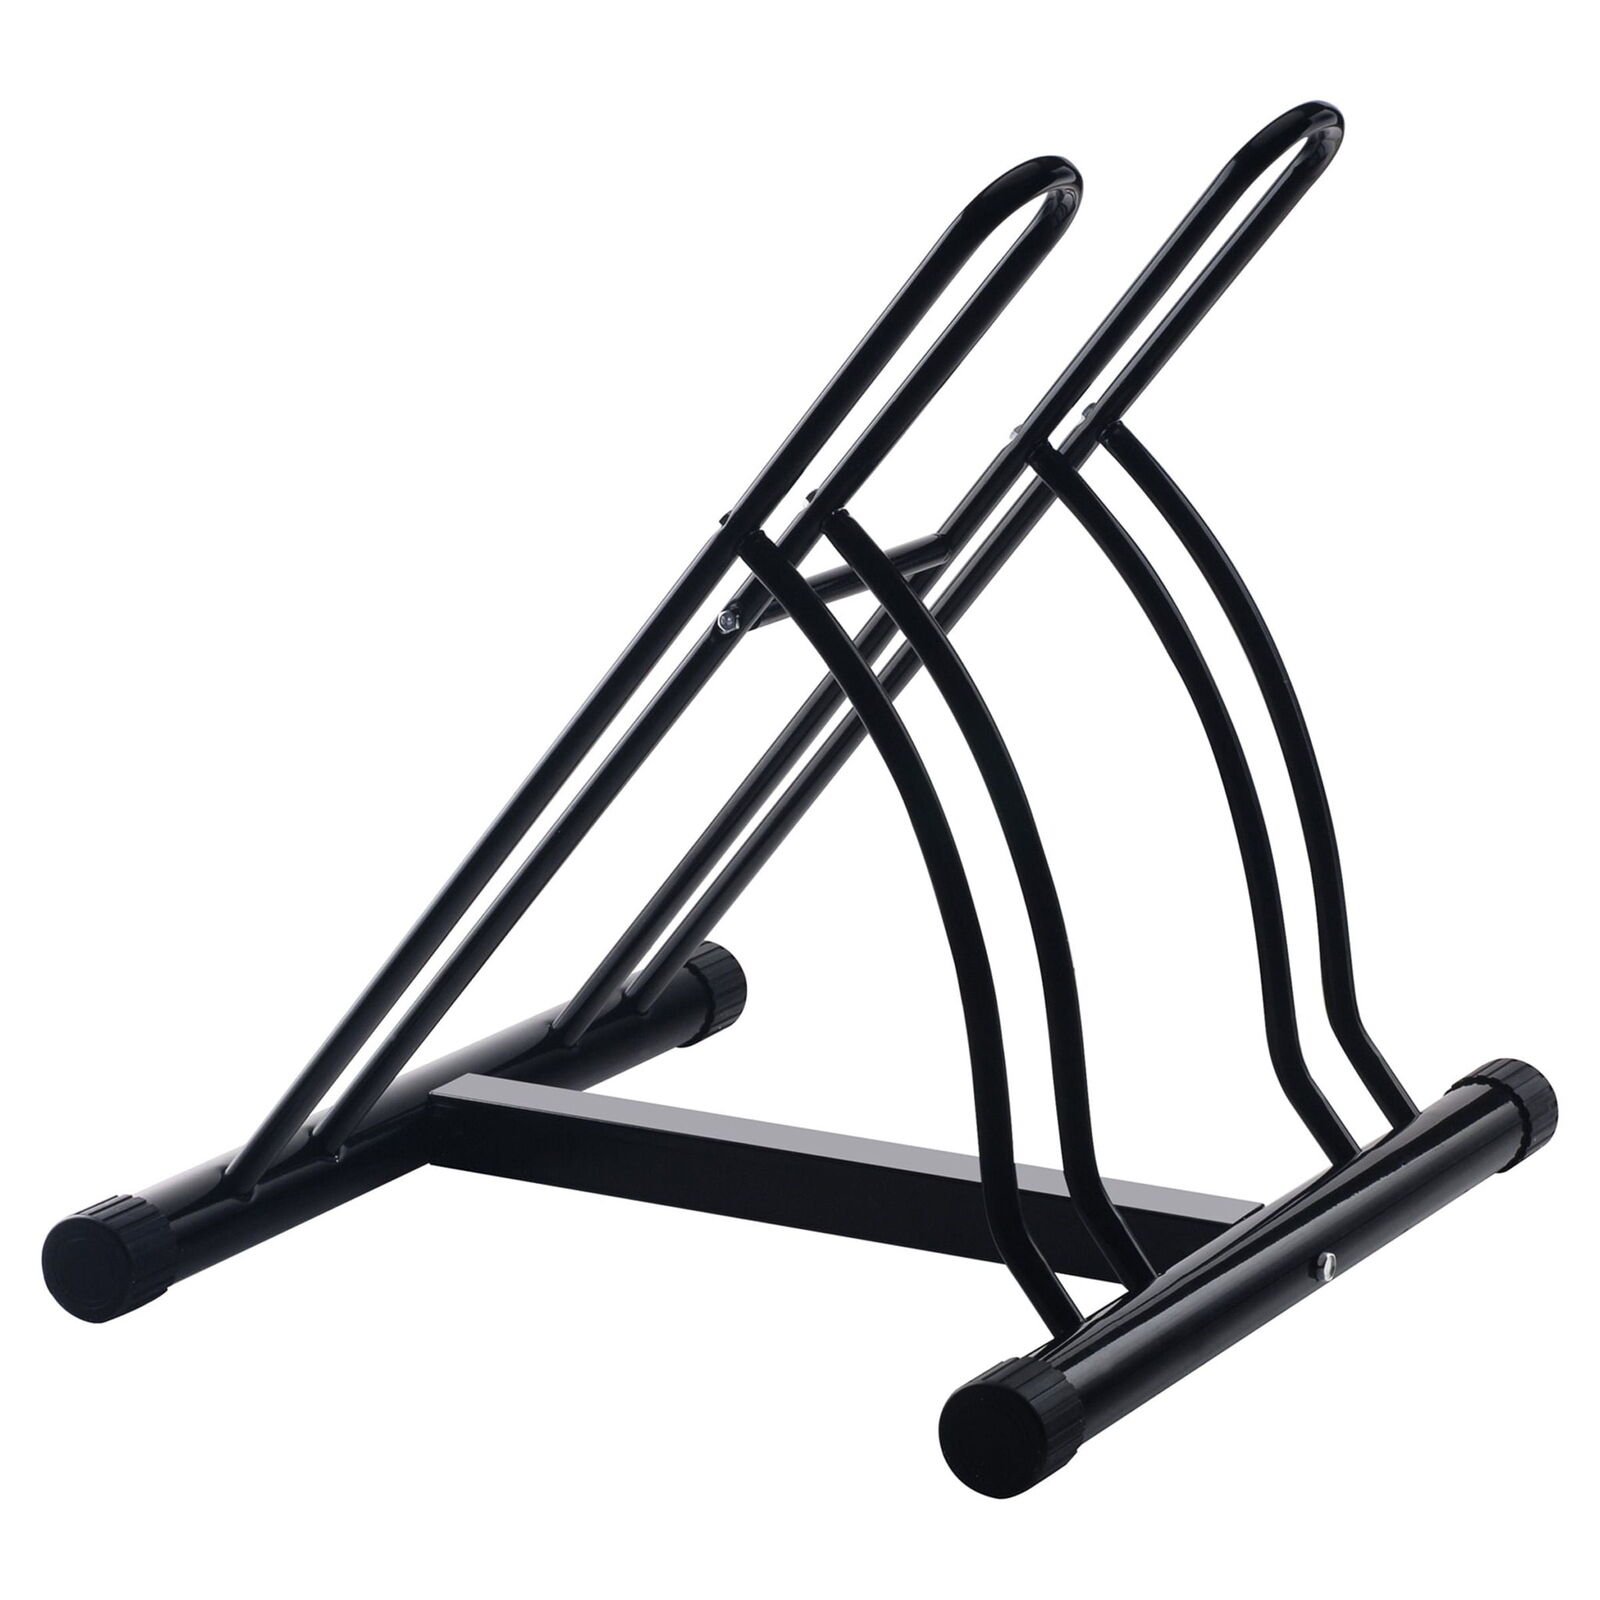 Bike Rack – Dual Bicycle Stand for 2 Mountain, Road, or Kid’s Bikes – Indoor